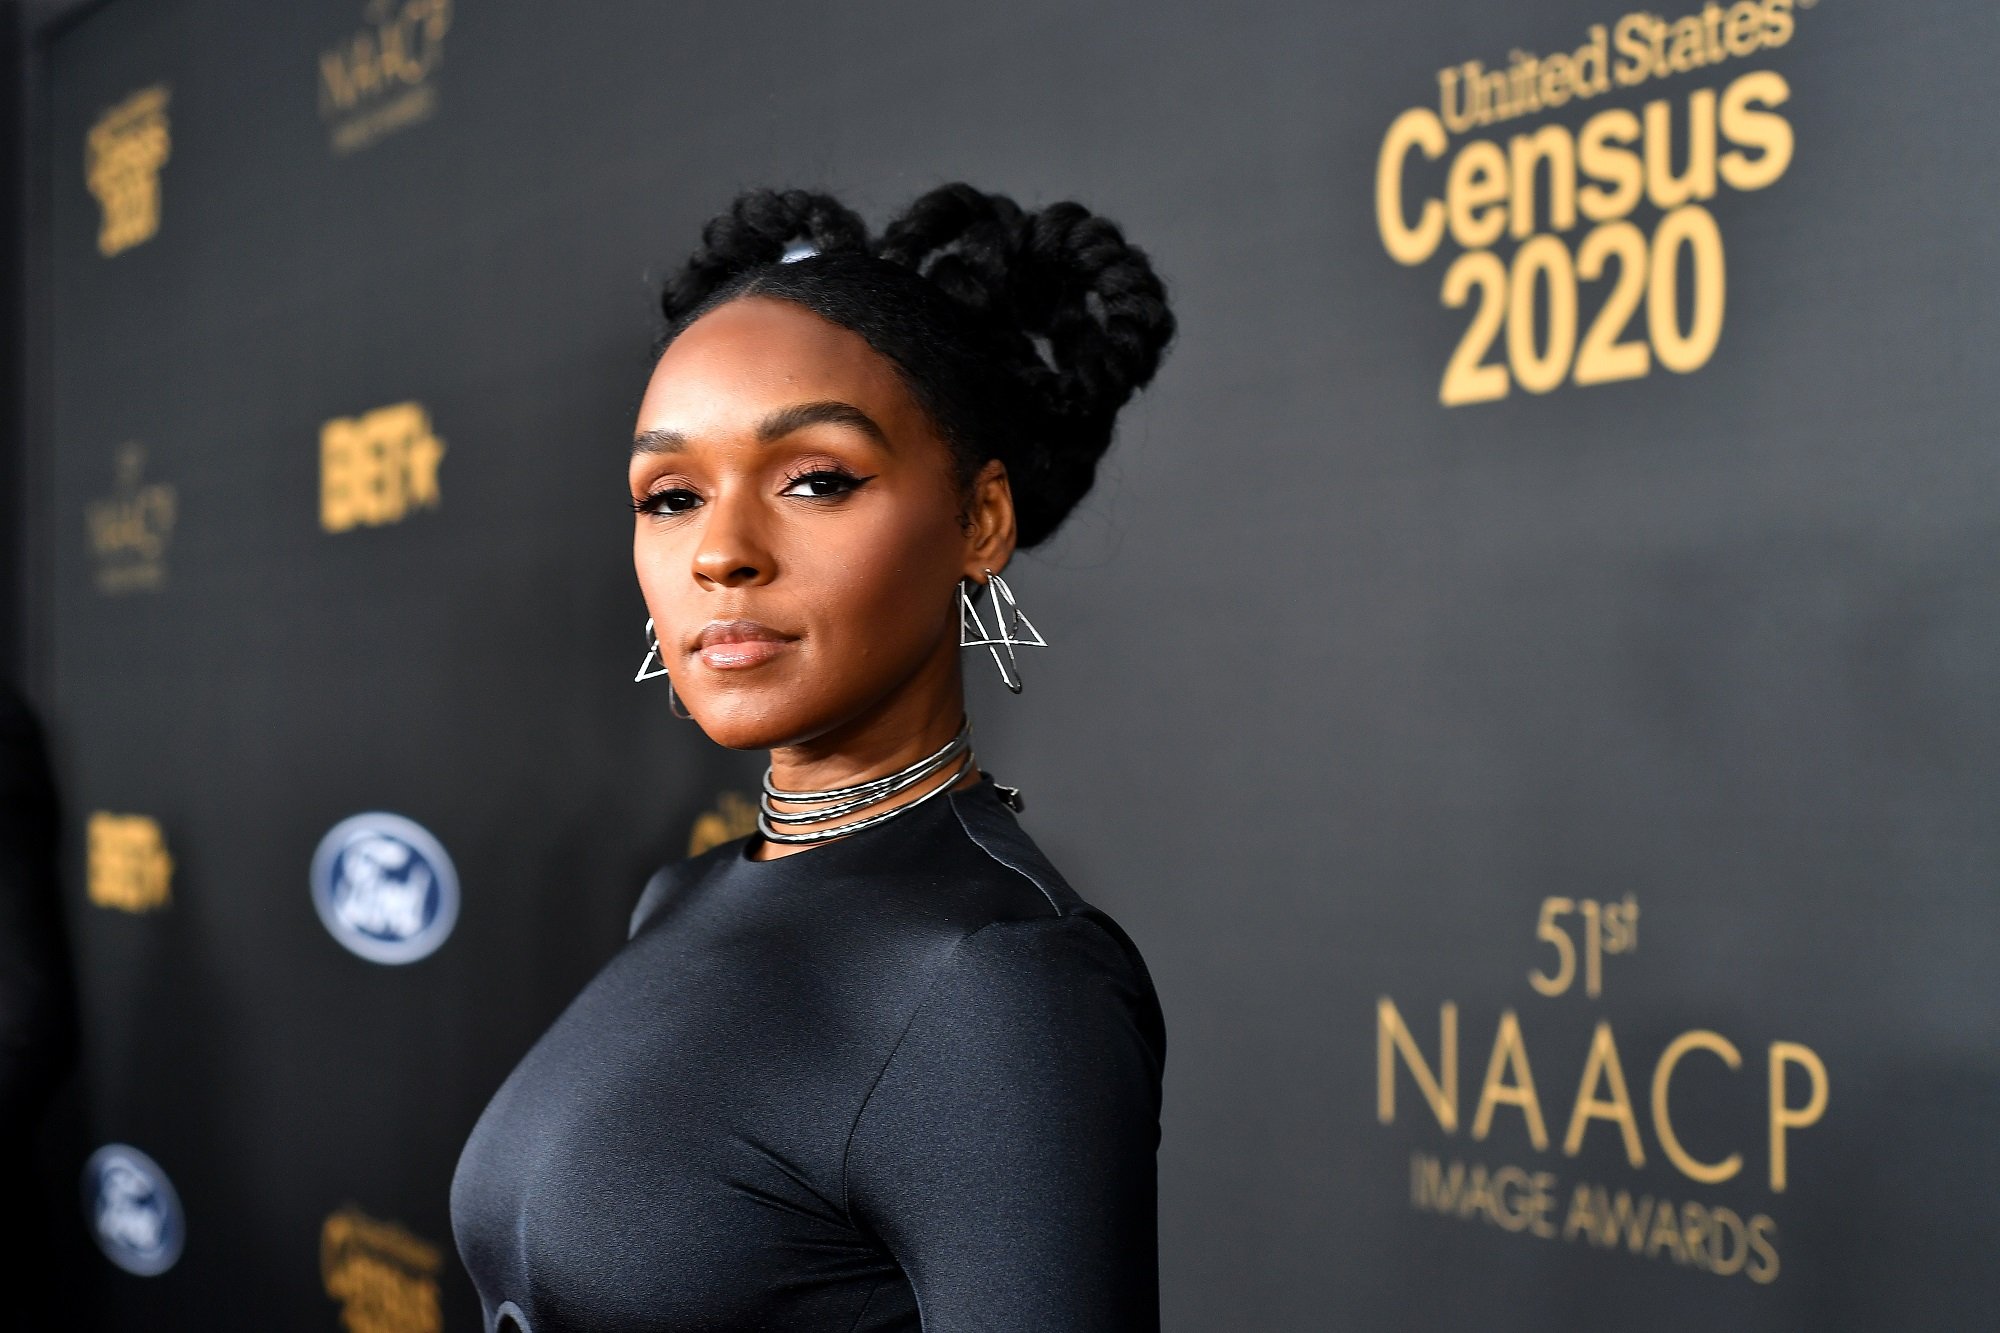 Janelle Monáe attends the 51st NAACP Image Awards on February 22, 2020 in Pasadena, California.